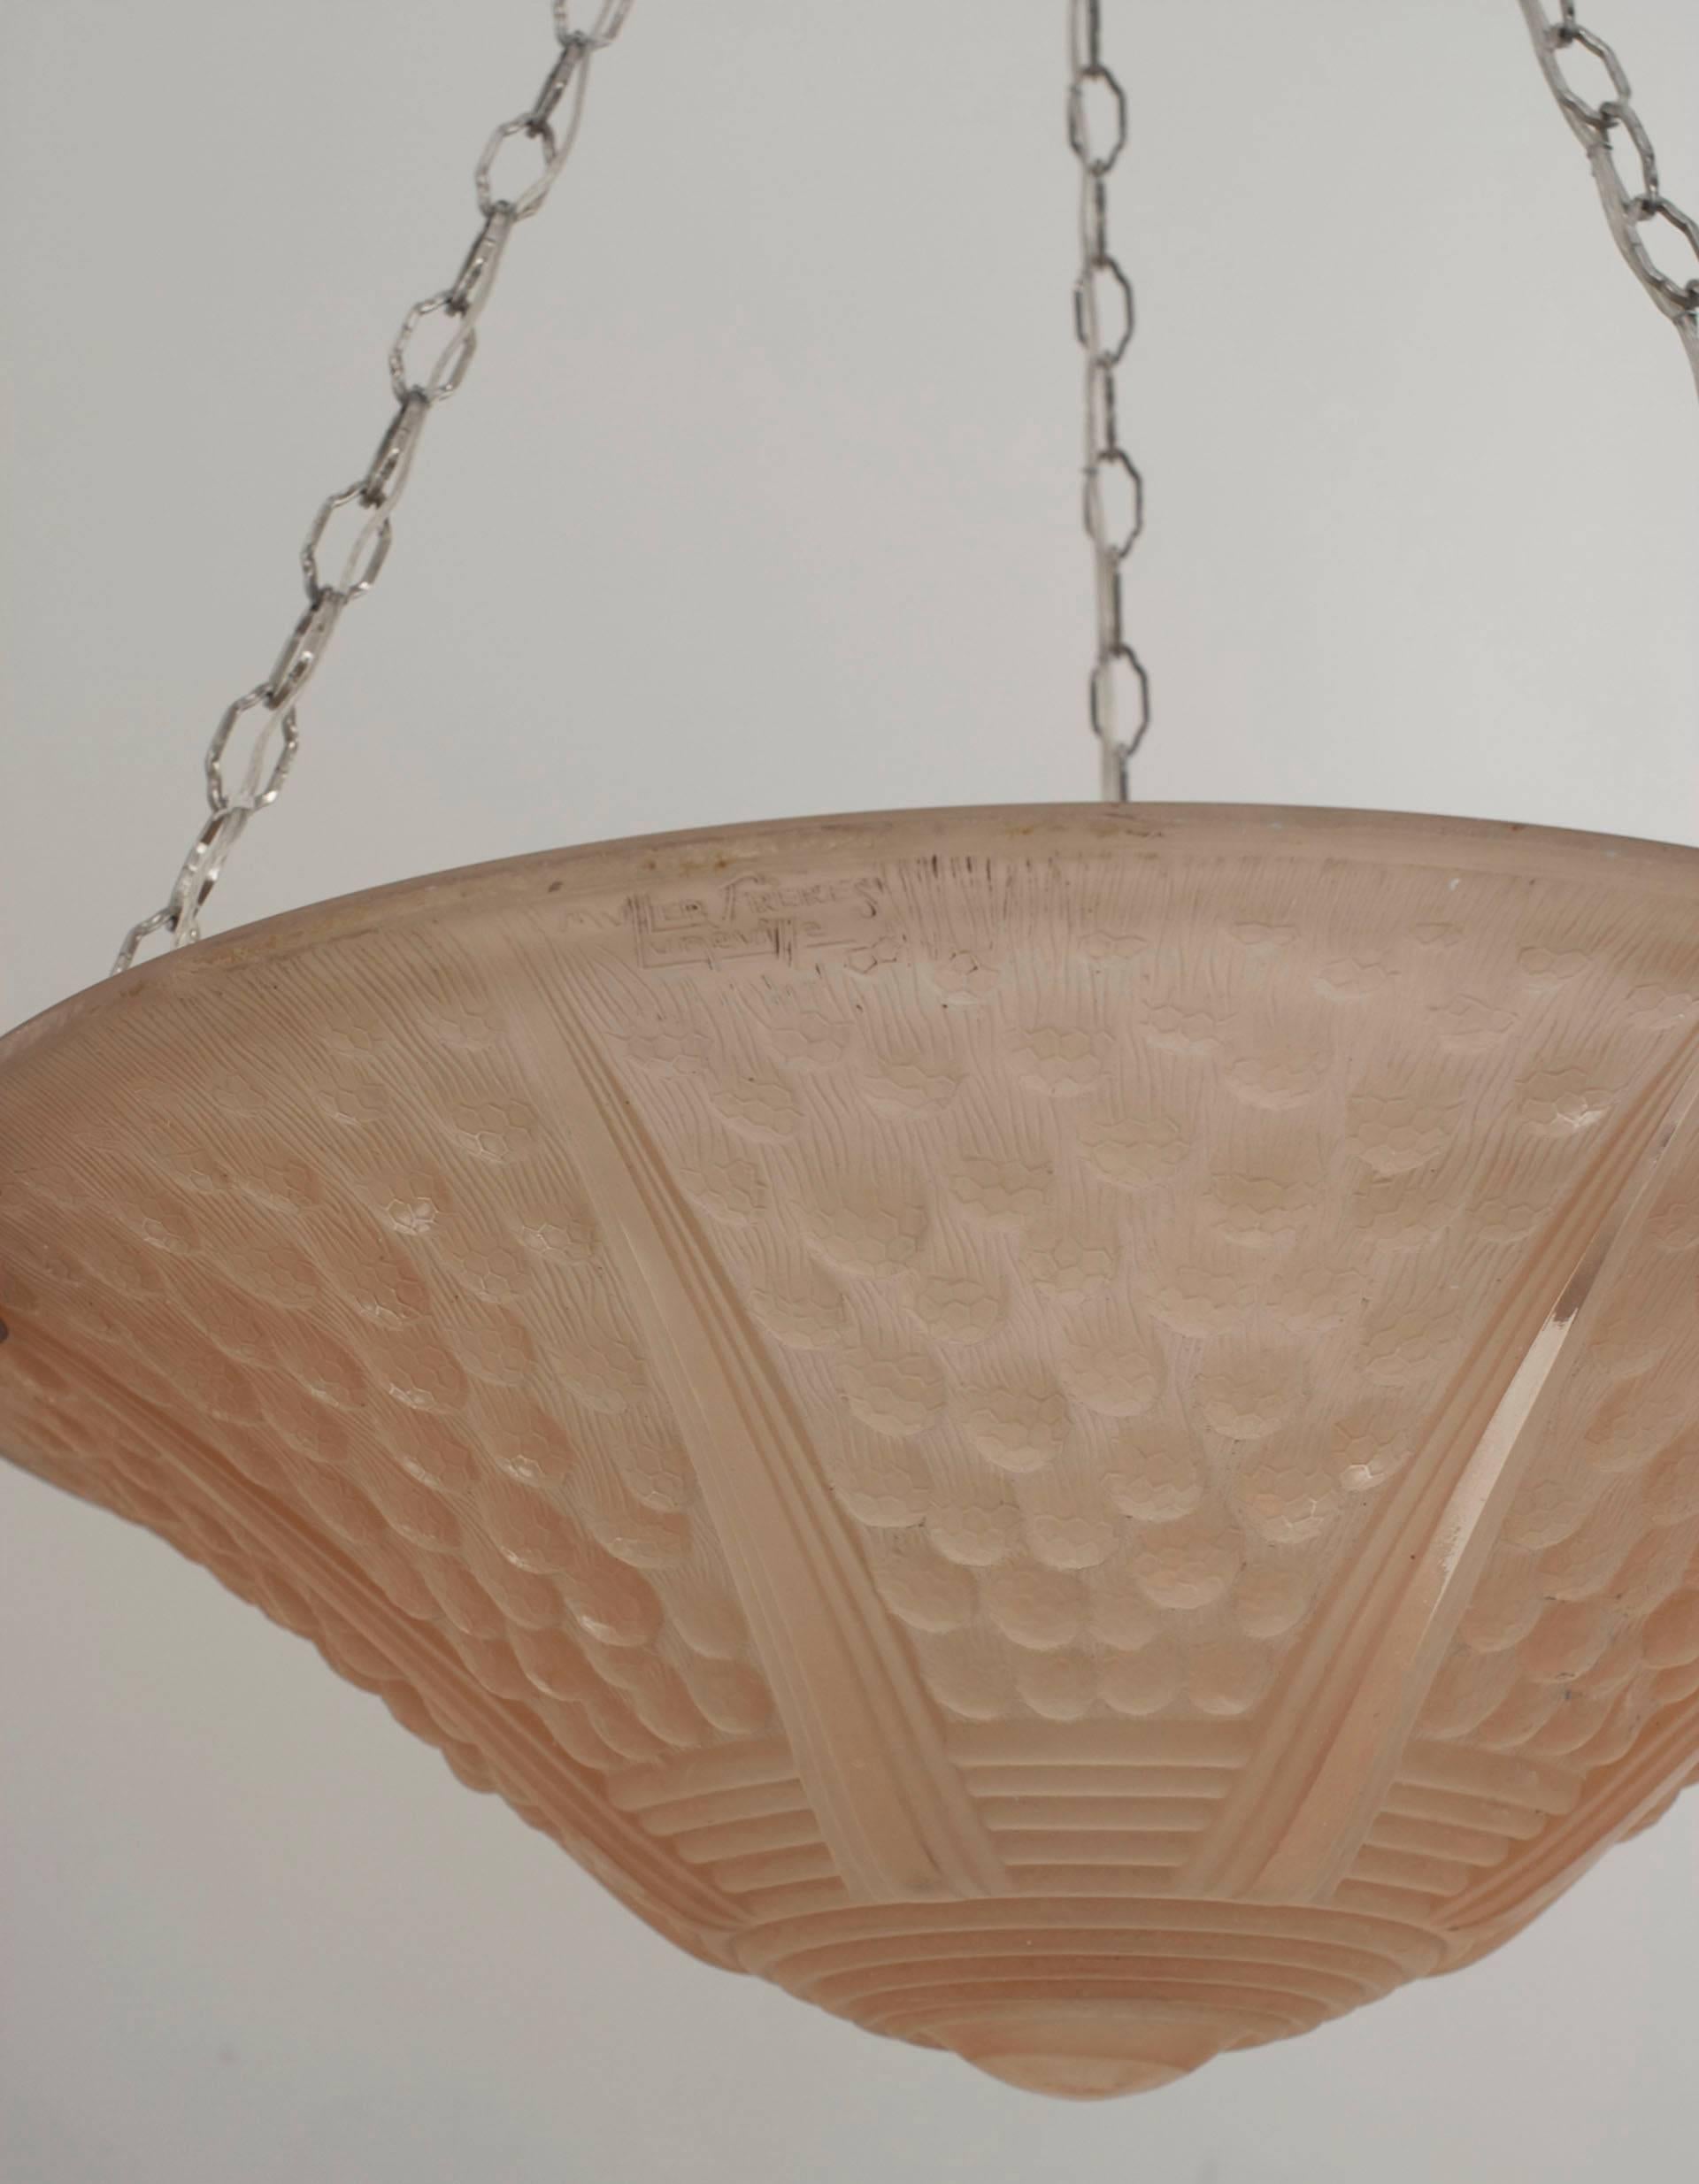 French Art Deco (circa 1925) round pendant form pink tinted glass chandelier with a fluted round bottom and 